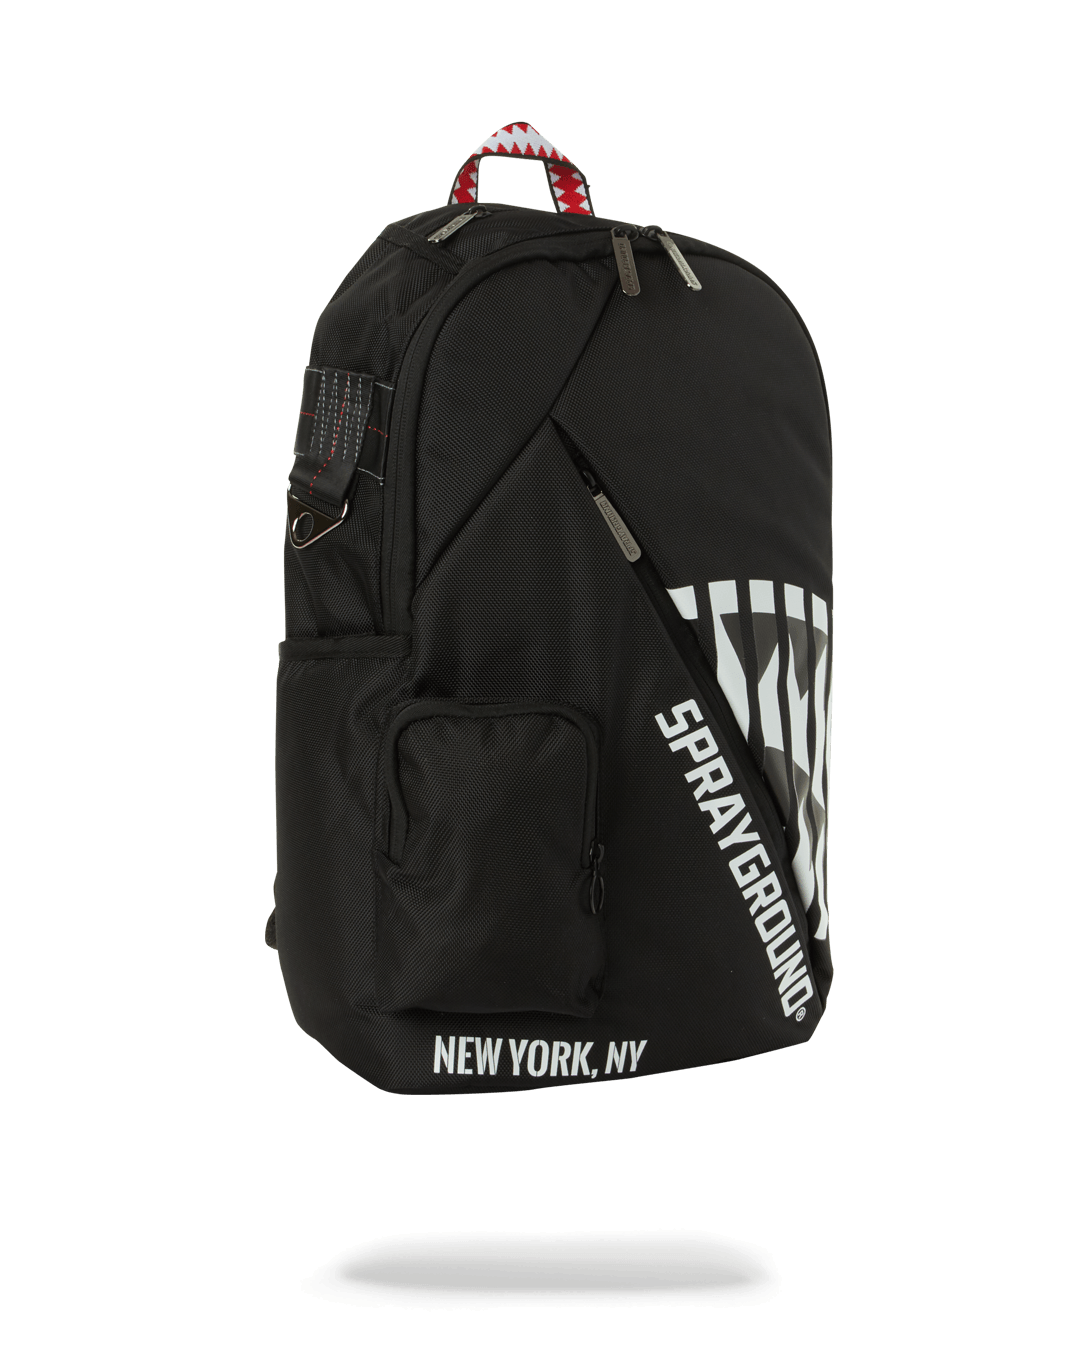 Cheap - Sale Sprayground Shadow Shark Backpack Discount authentic sale - At www.kbic-nsn.gov